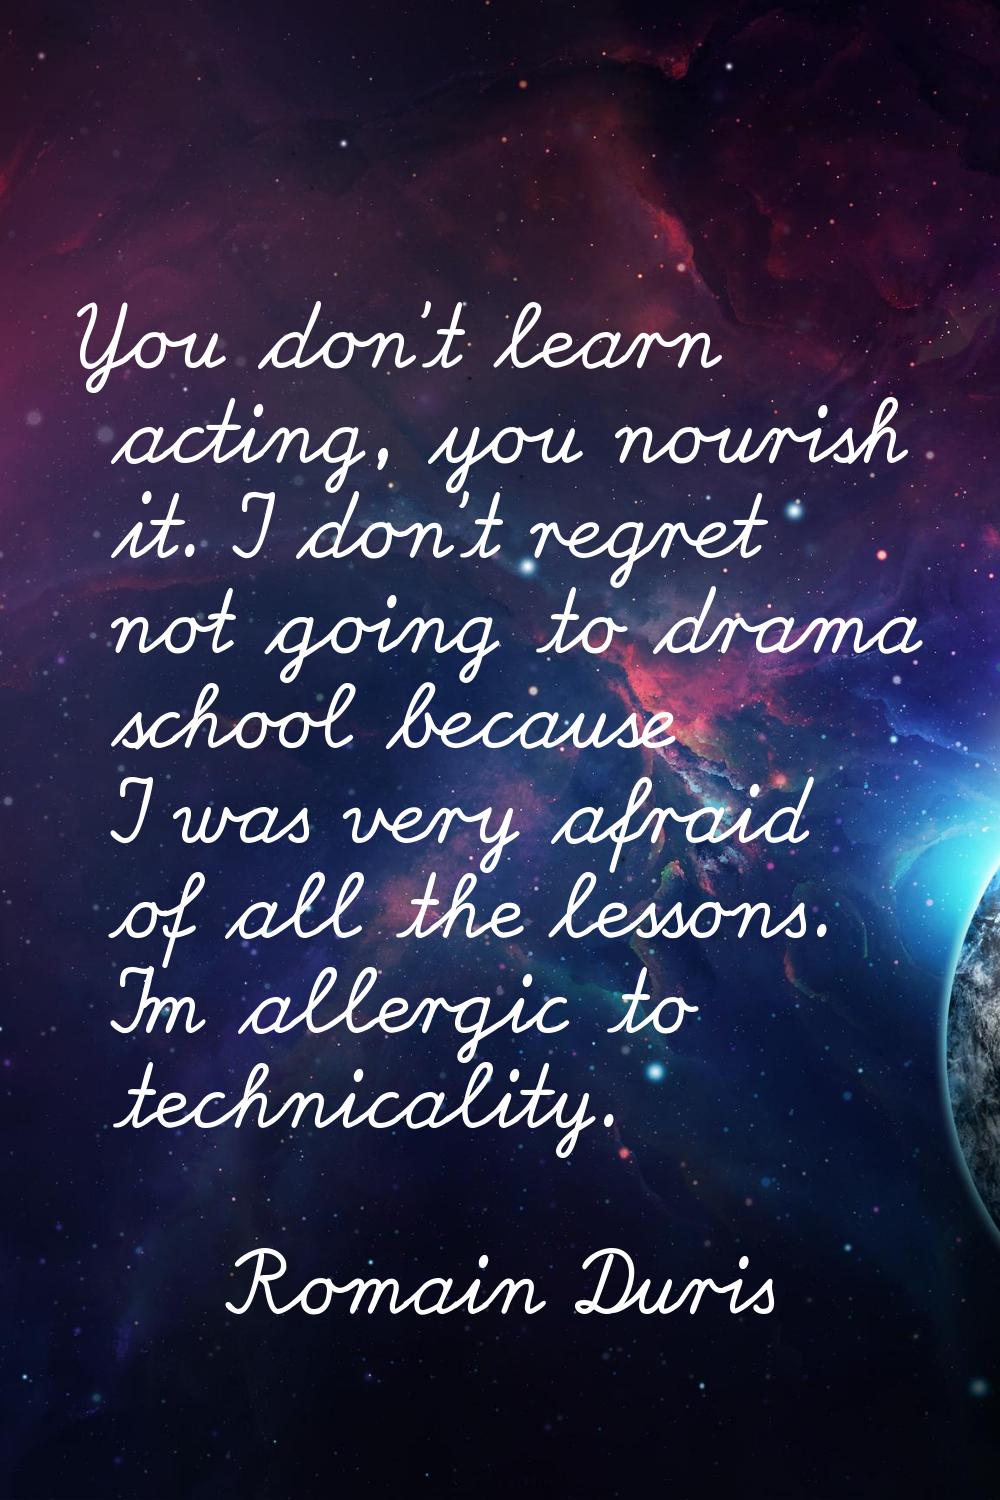 You don't learn acting, you nourish it. I don't regret not going to drama school because I was very